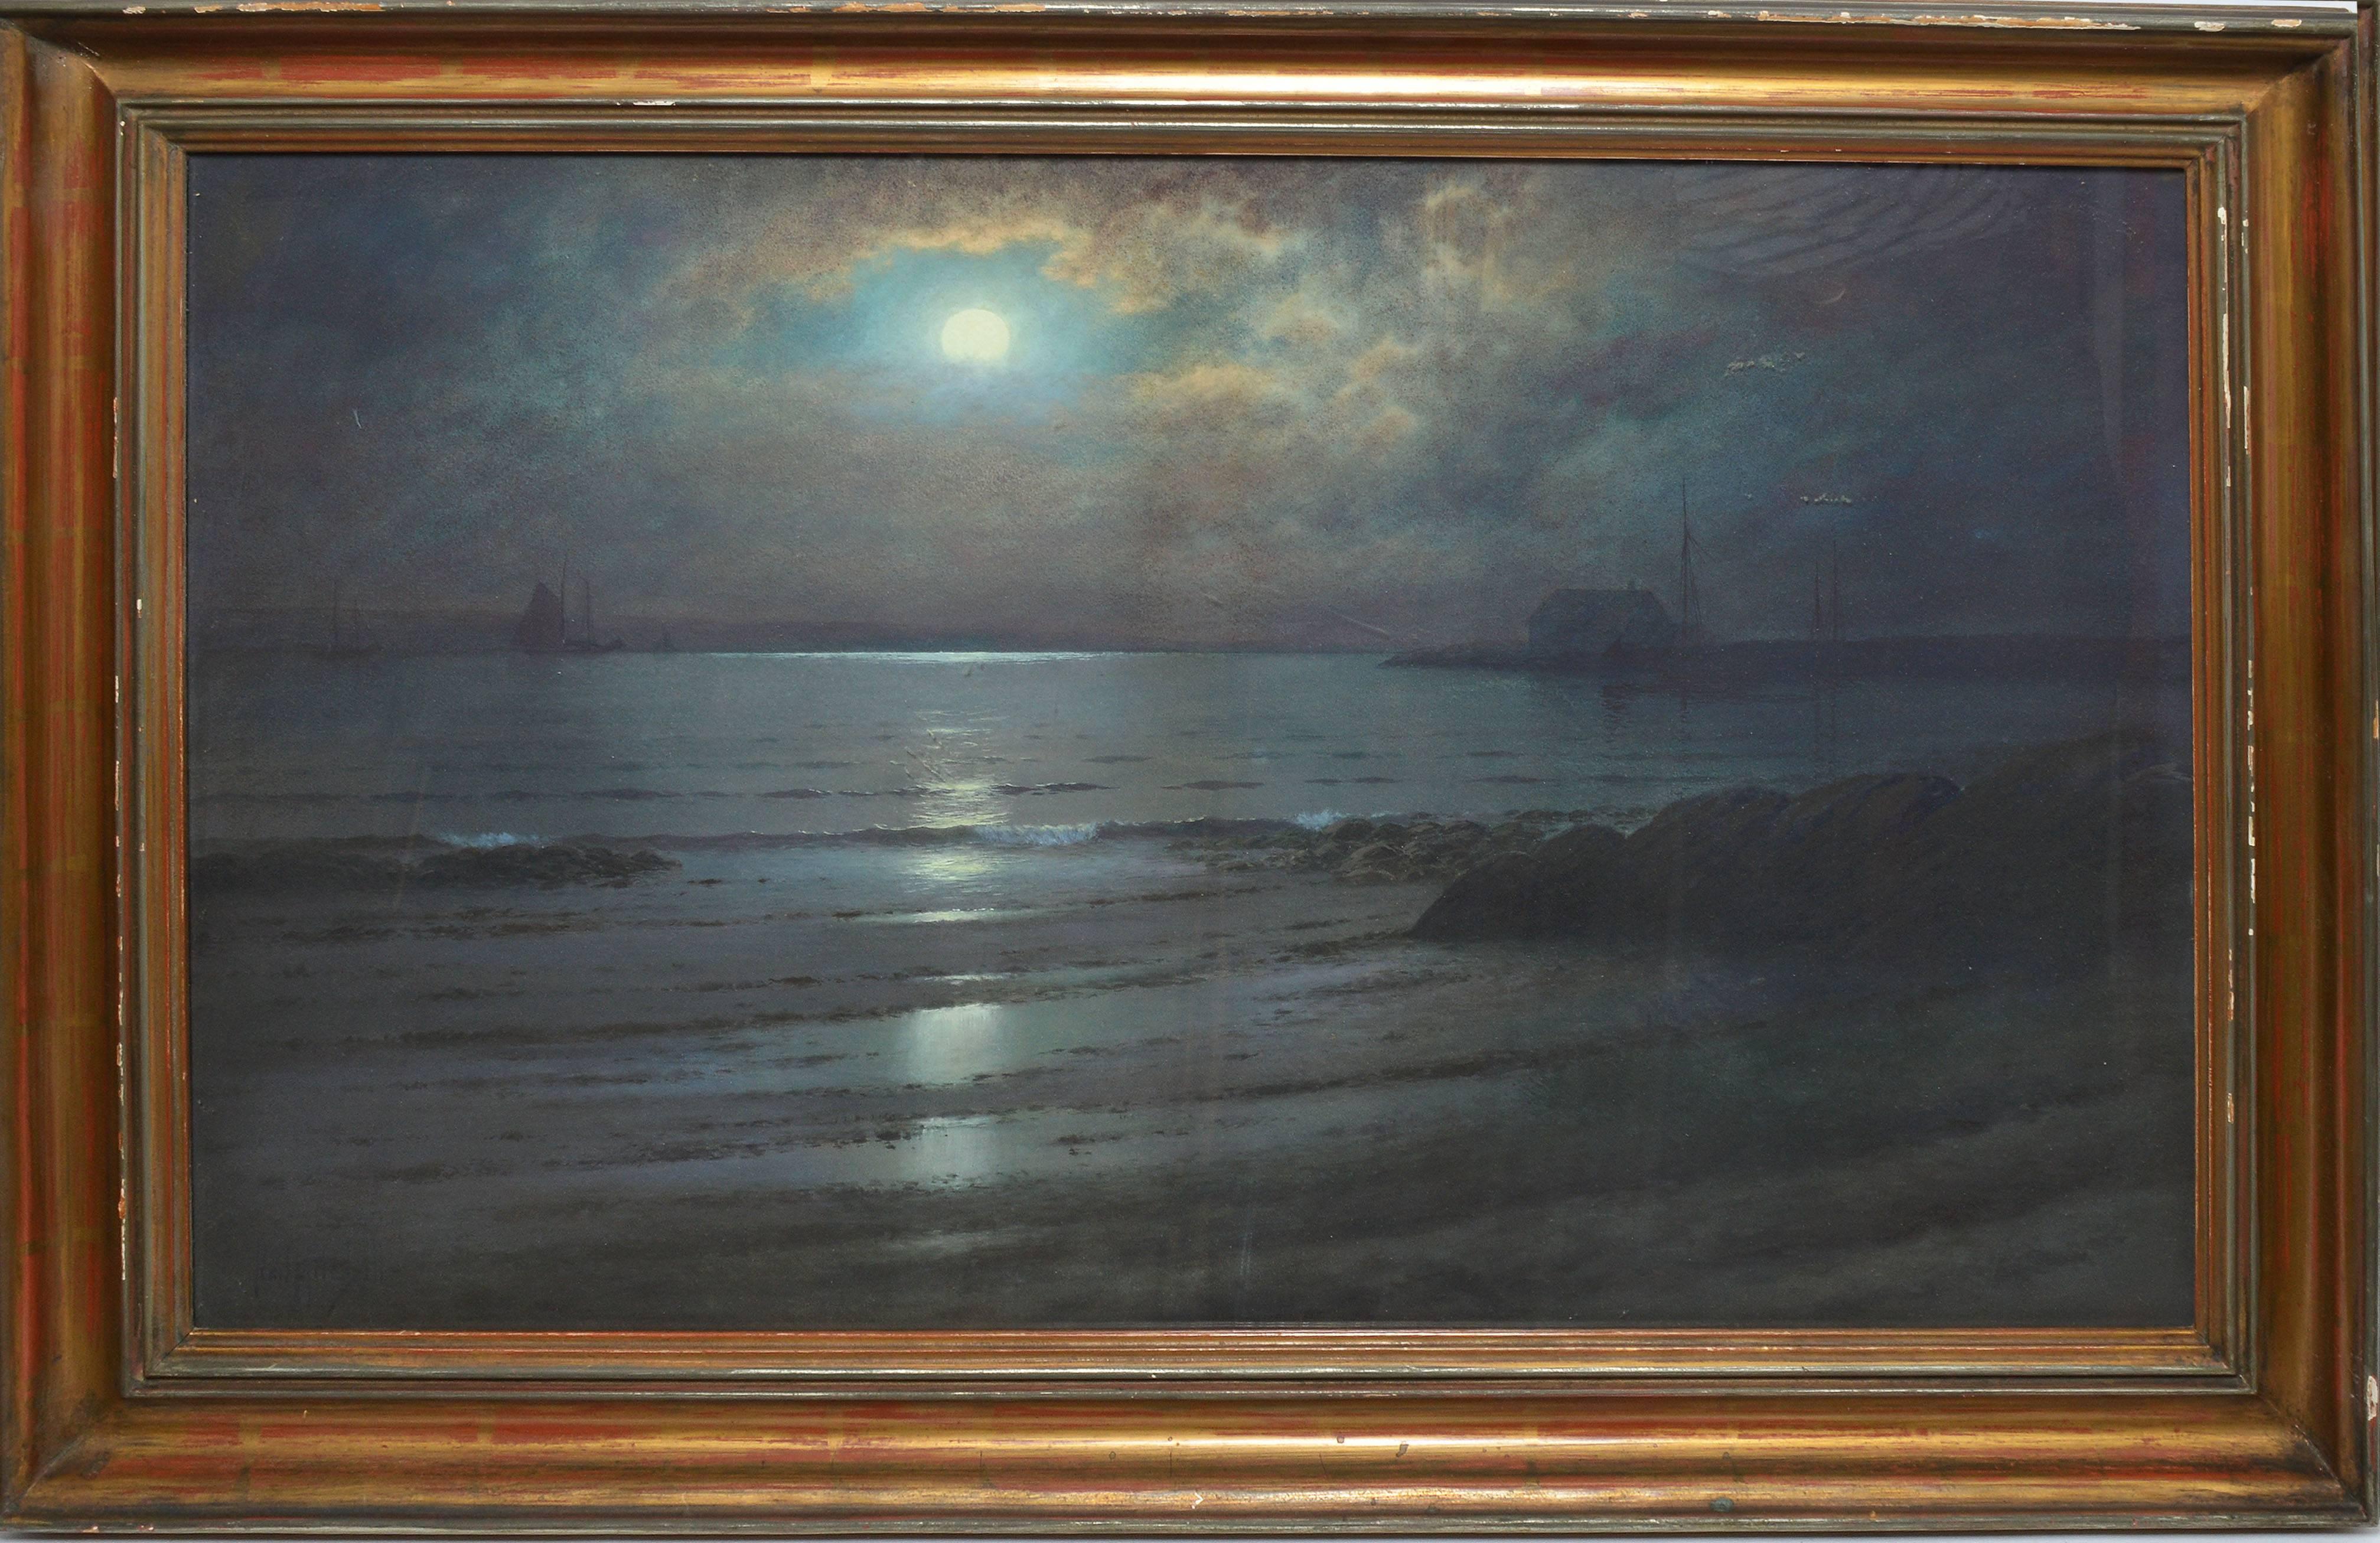 Realist view of a harbor under moonlight by Neil Mitchill  (1858 - 1934).  Watercolor and gouache on board, circa 1890.  Signed lower right, "Neil Mitchill".  Displayed in a period giltwood frame, displayed behind glass.  Image size, 28"L x 18"H,